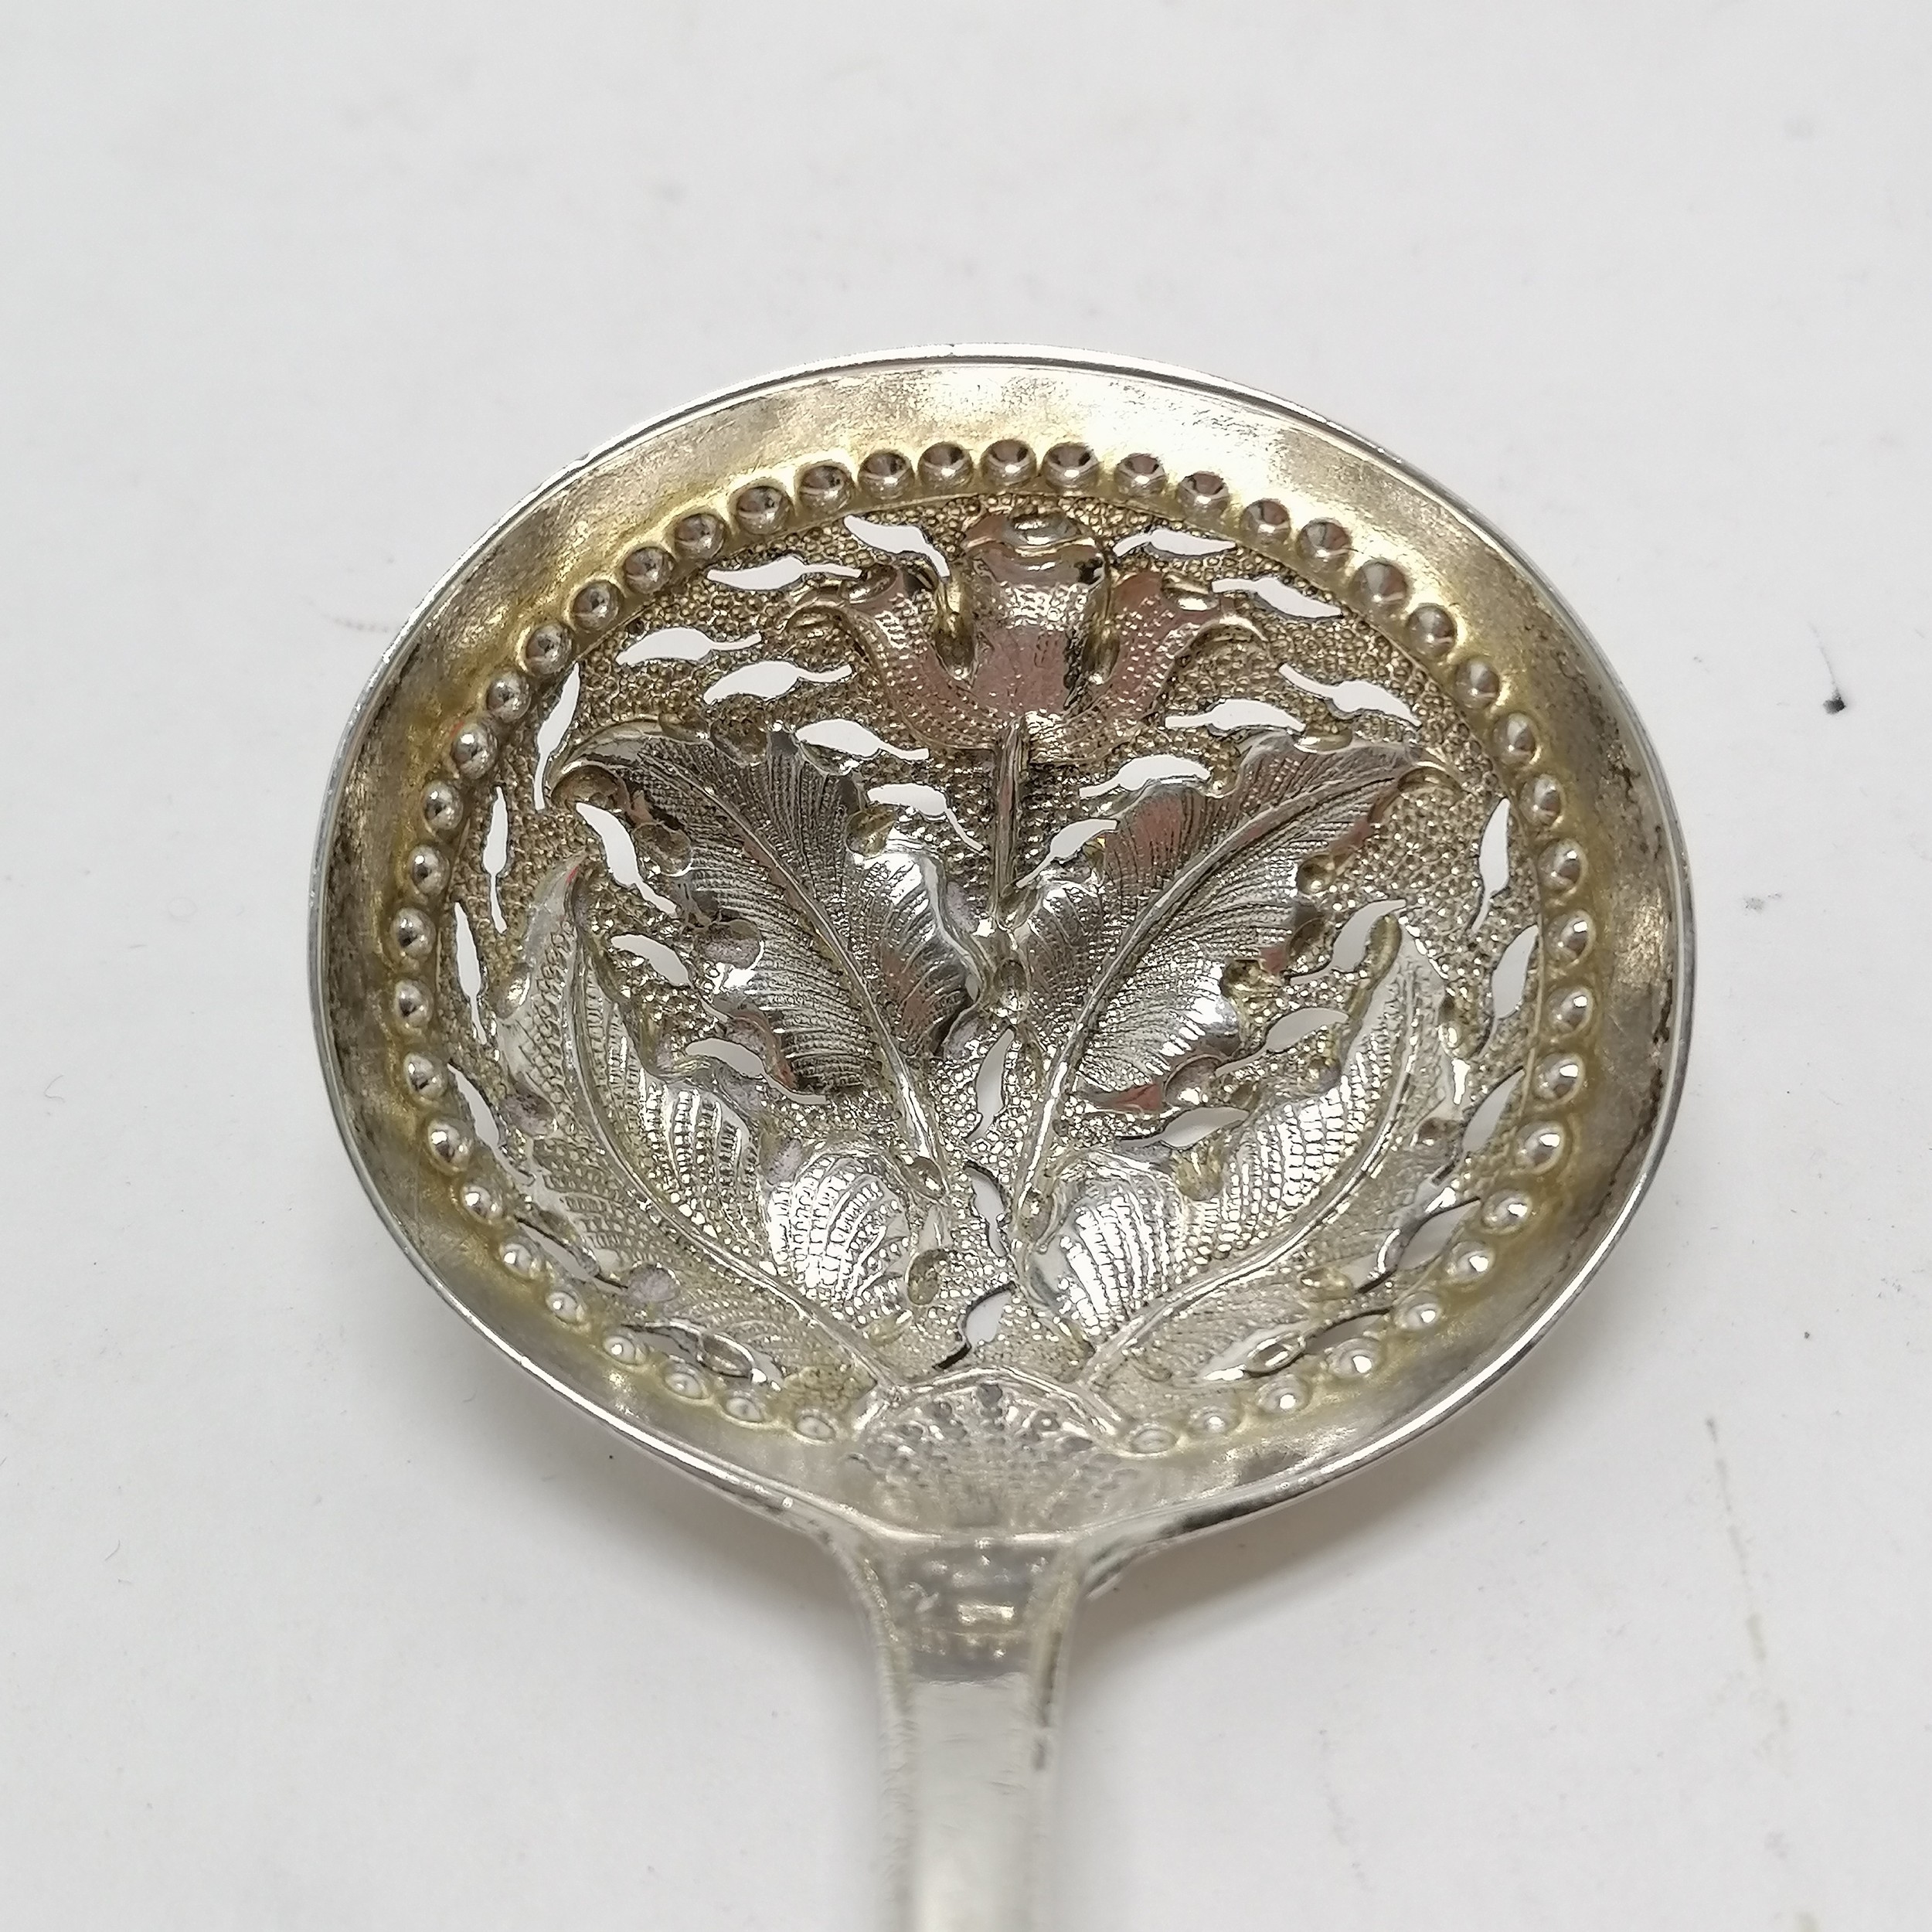 1830 silver sifting spoon with embossed & pierced detail to bowl which is in the form of a flower - Image 4 of 4